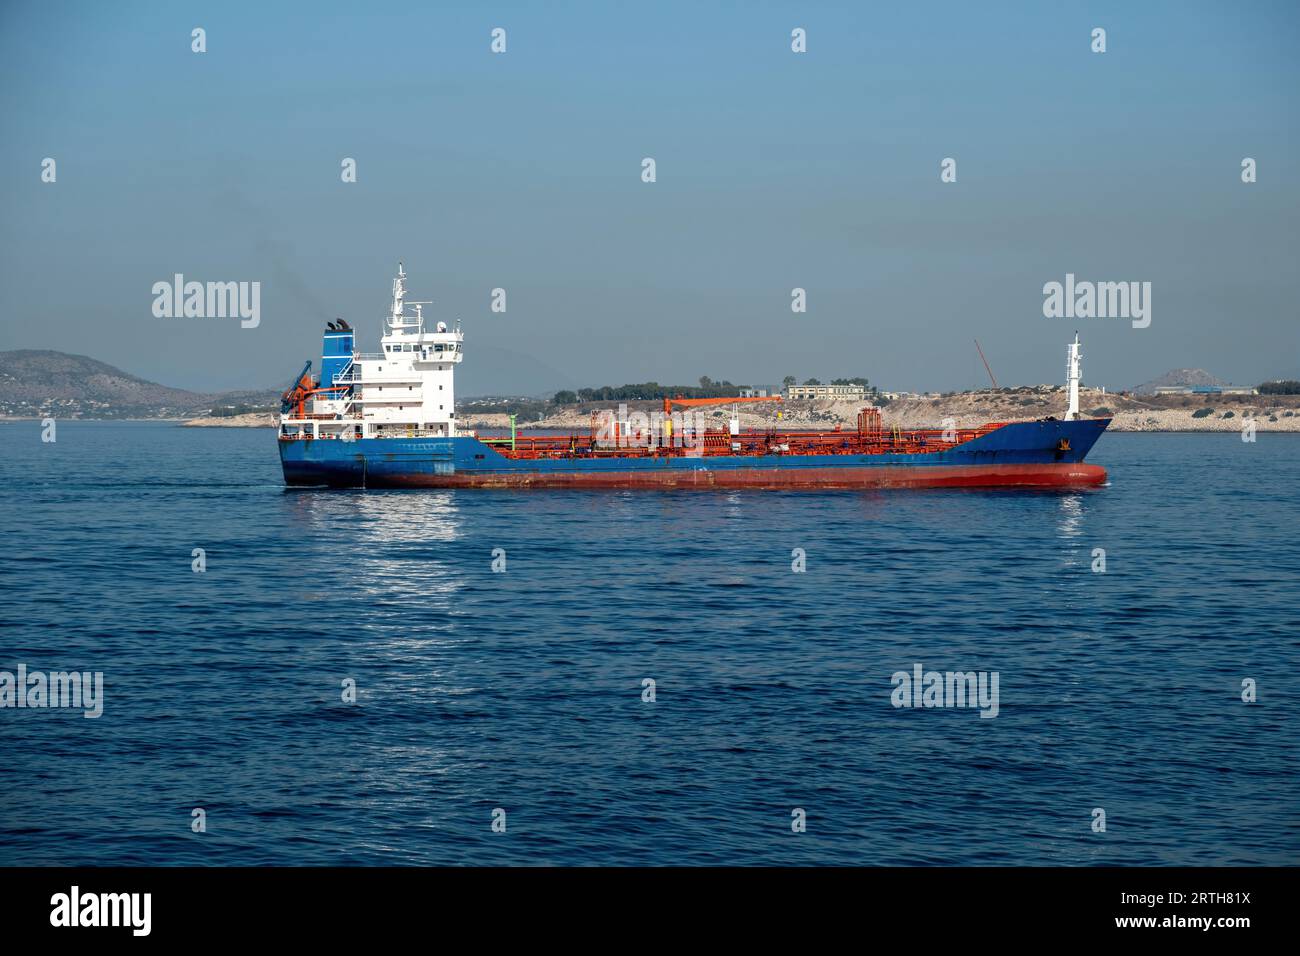 Container cargo ship loaded leaves Piraeus port, Greece. Import export business and logistics. Commercial trade and transportation concept. Stock Photo